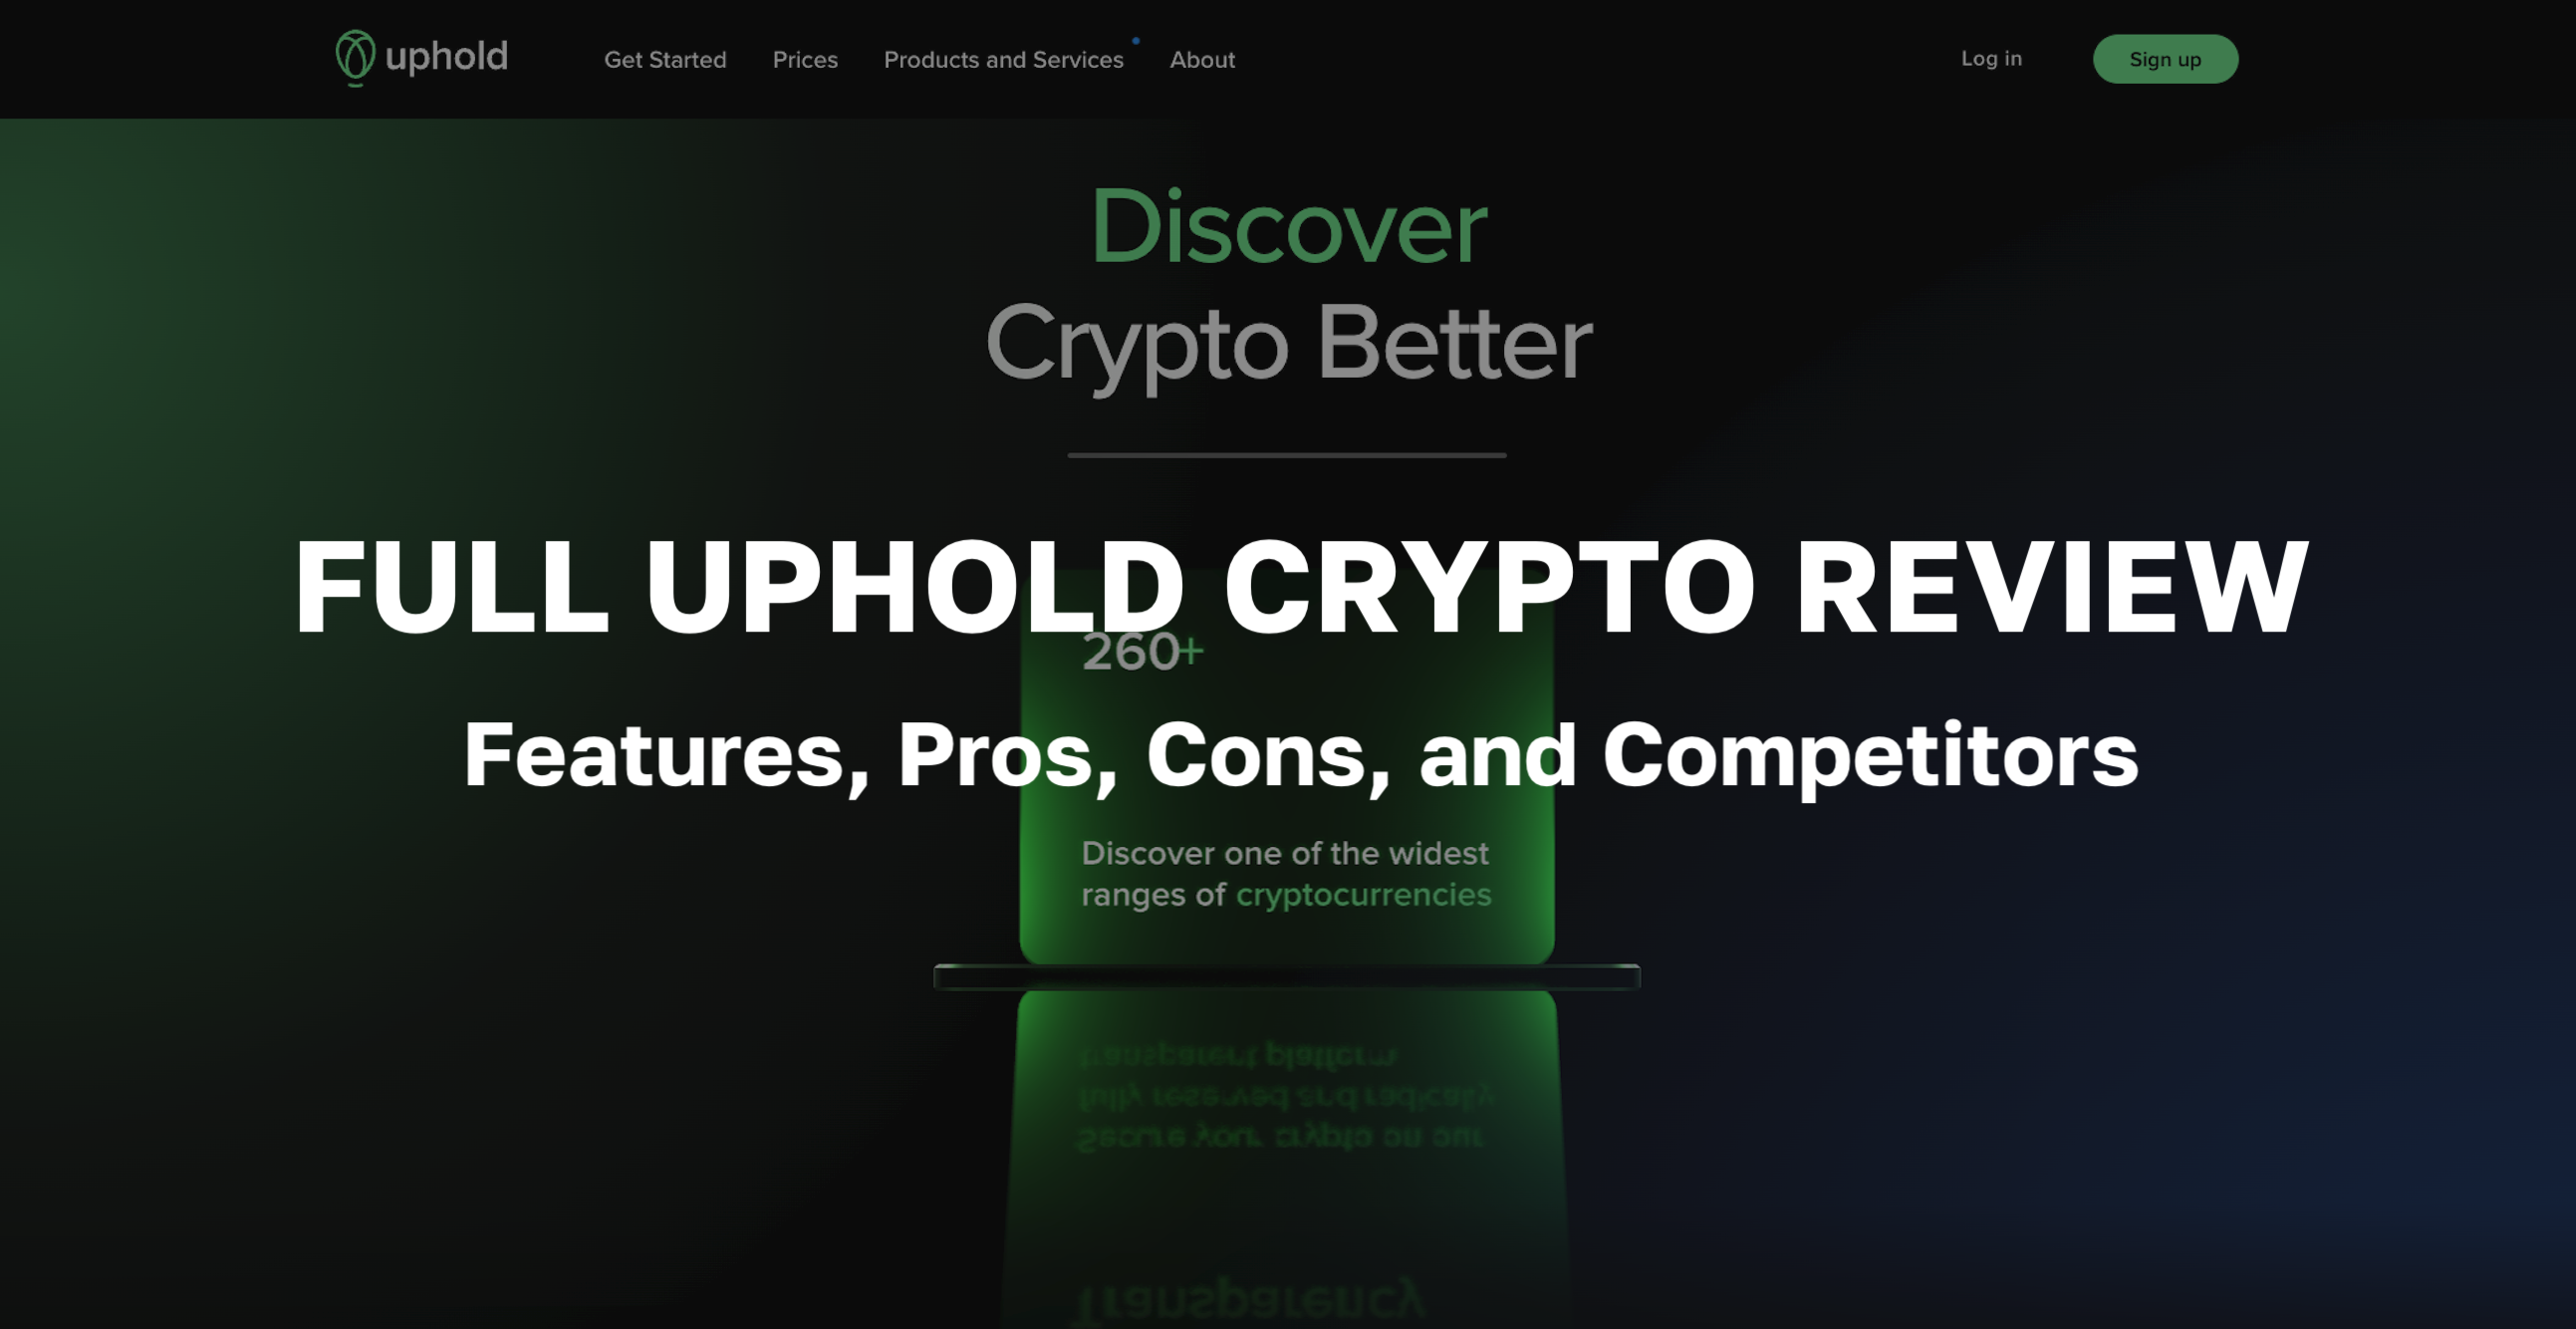 Uphold Crypto Review - Features, Pros, Cons, and Competitors